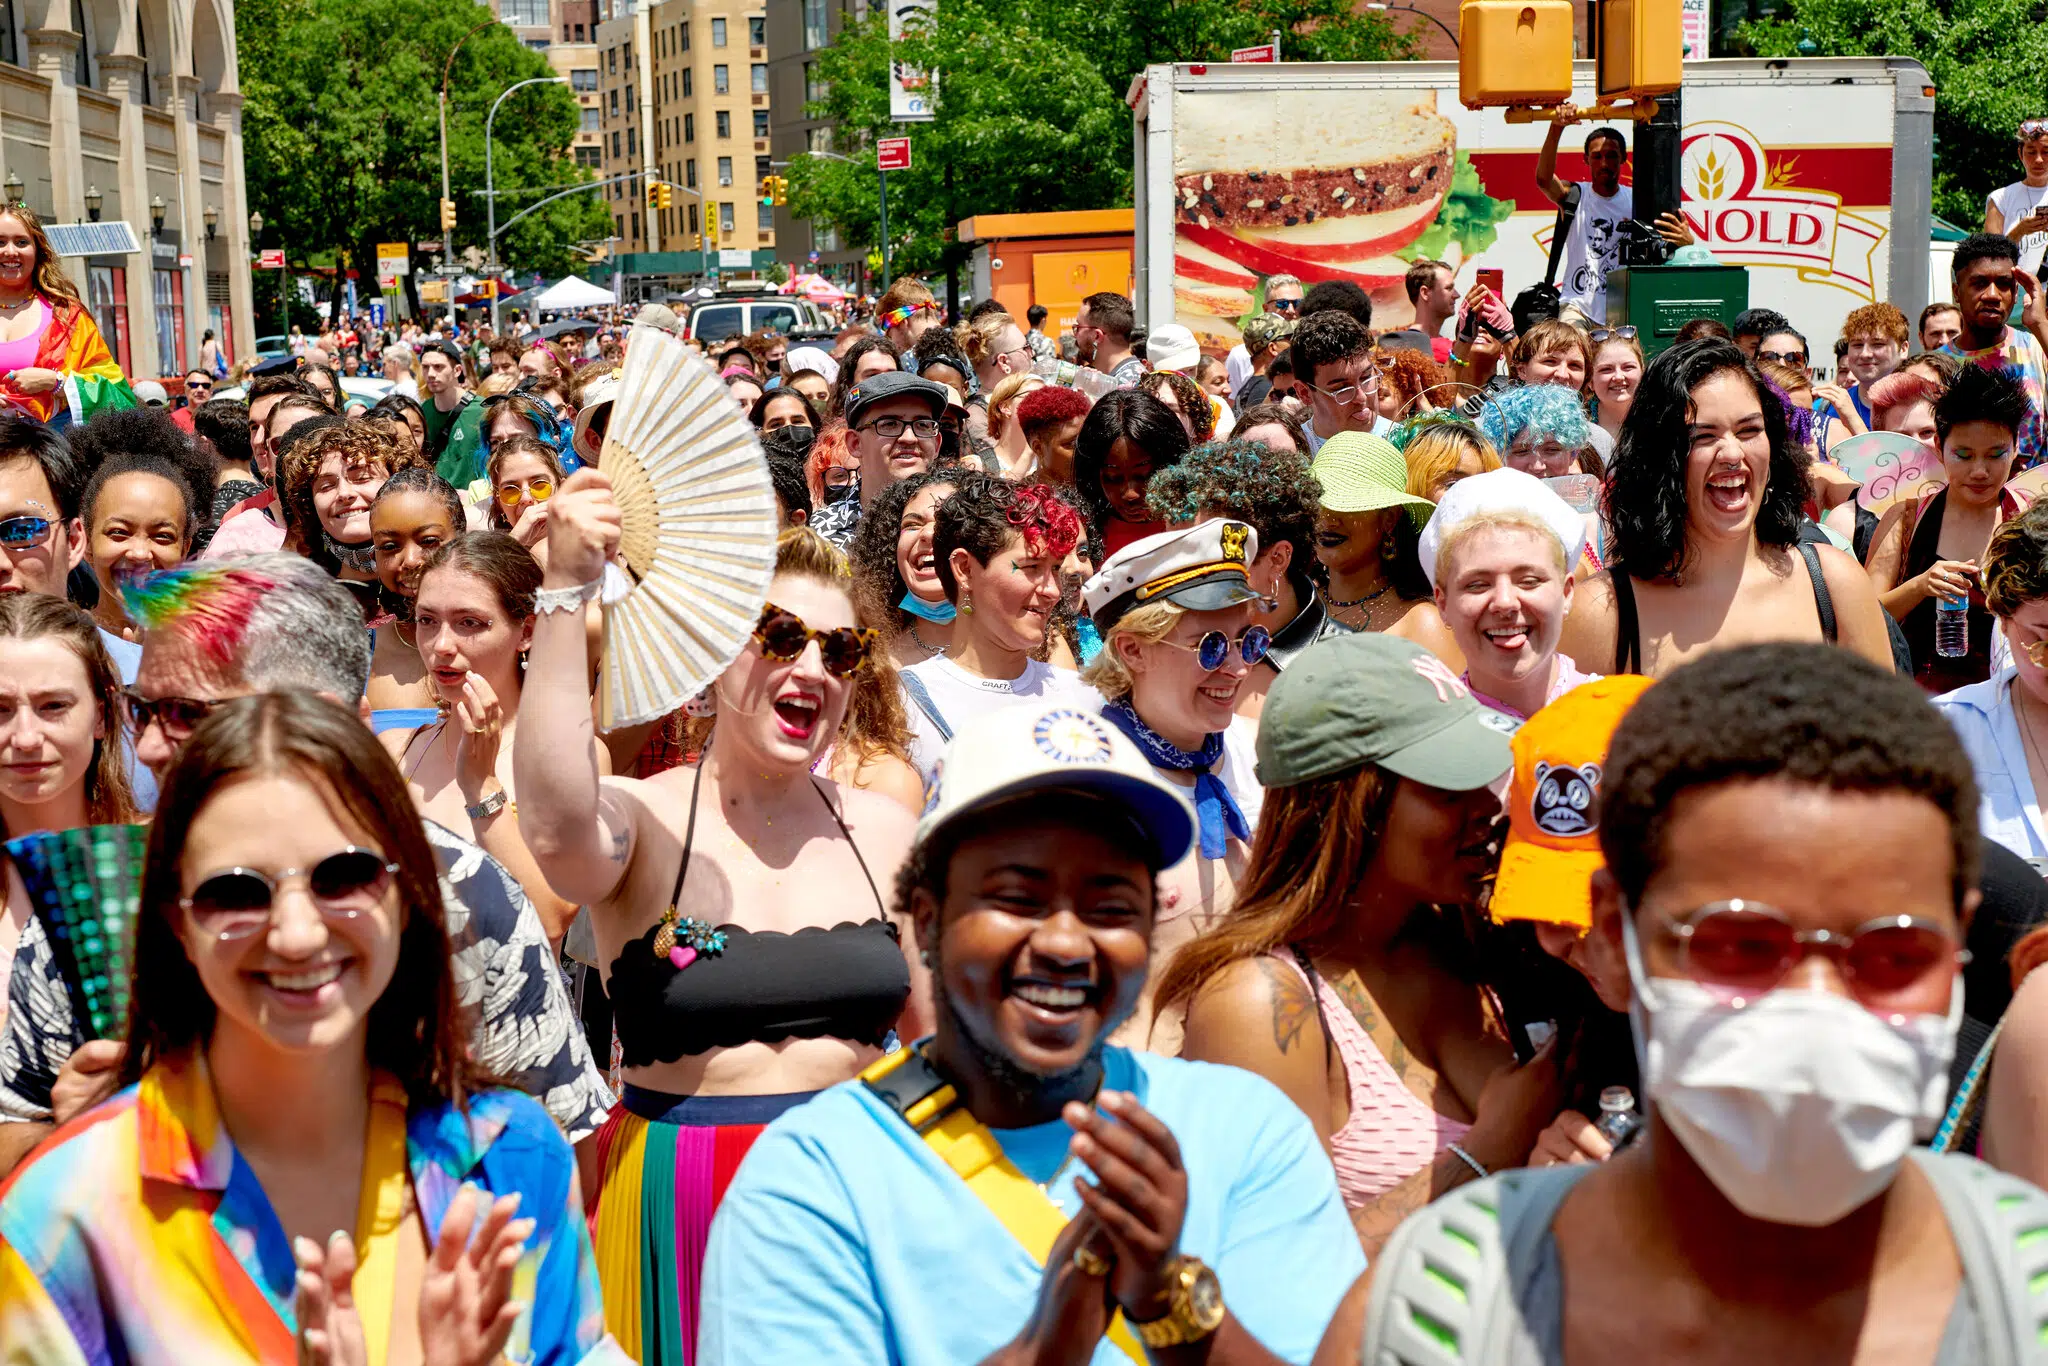 Pride Parade
Things to do in New York City in June